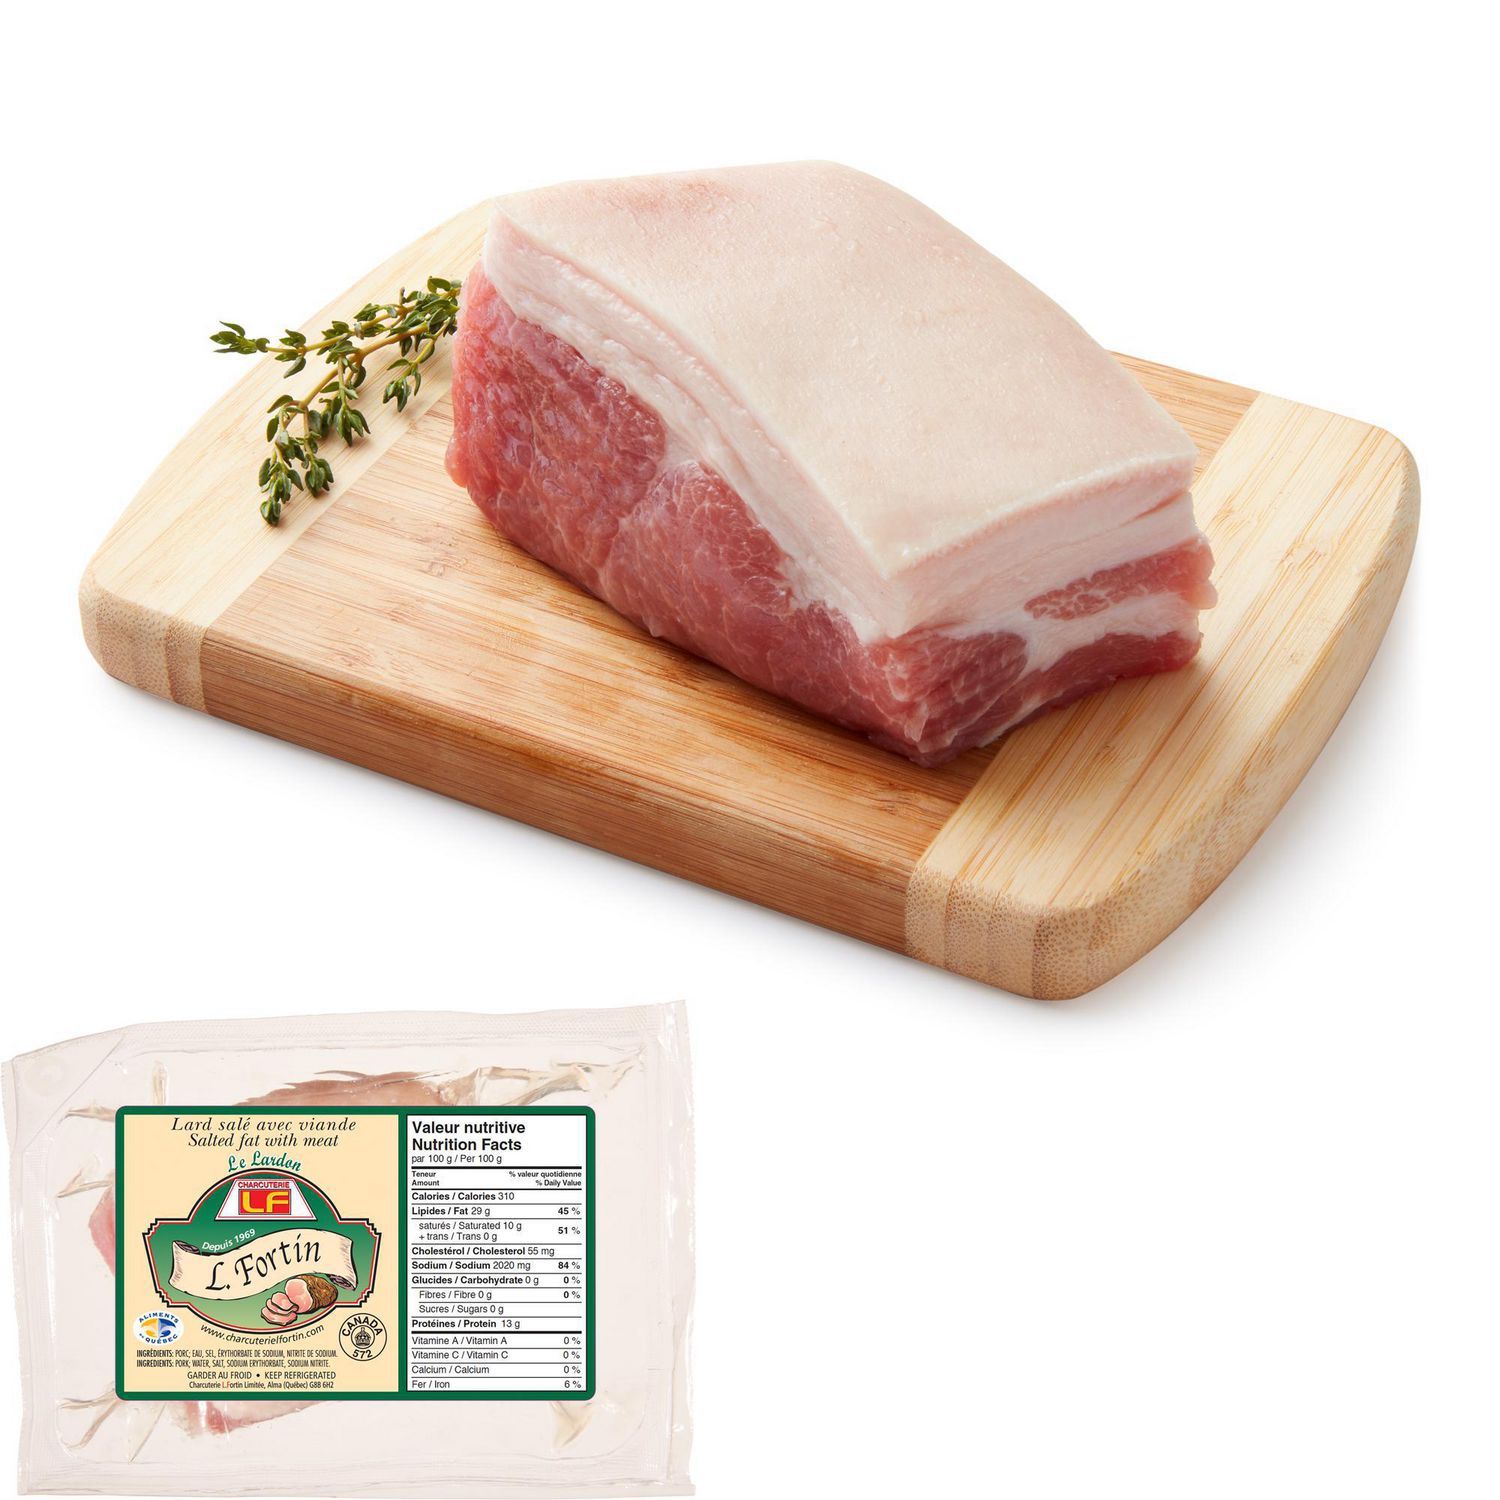 L Fortin Fresh Pork Salted Fat With Meat Walmart Canada